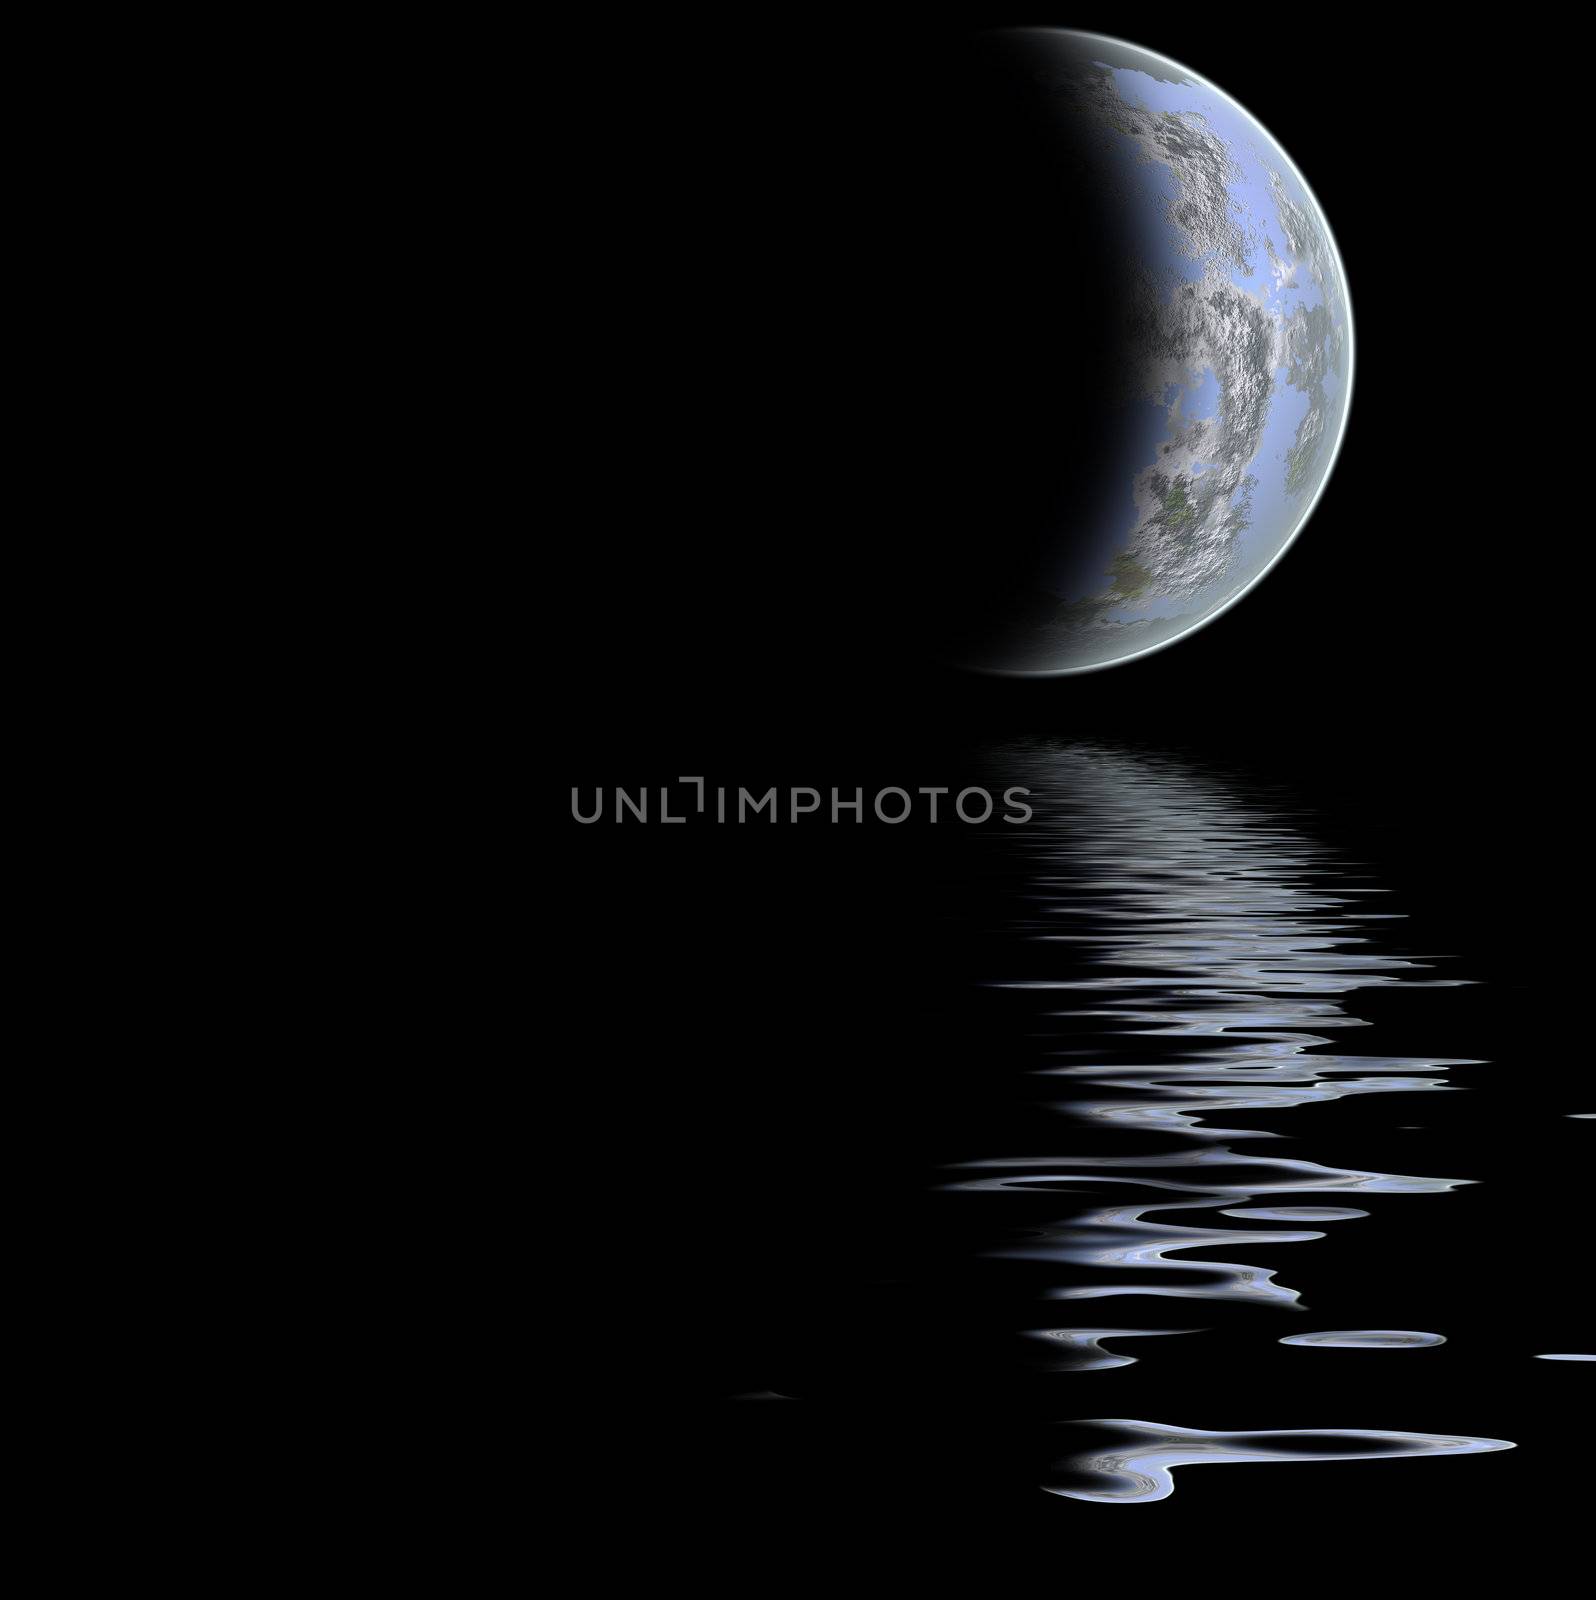 large moon reflecting over smooth waves on water  black outer space nice web background